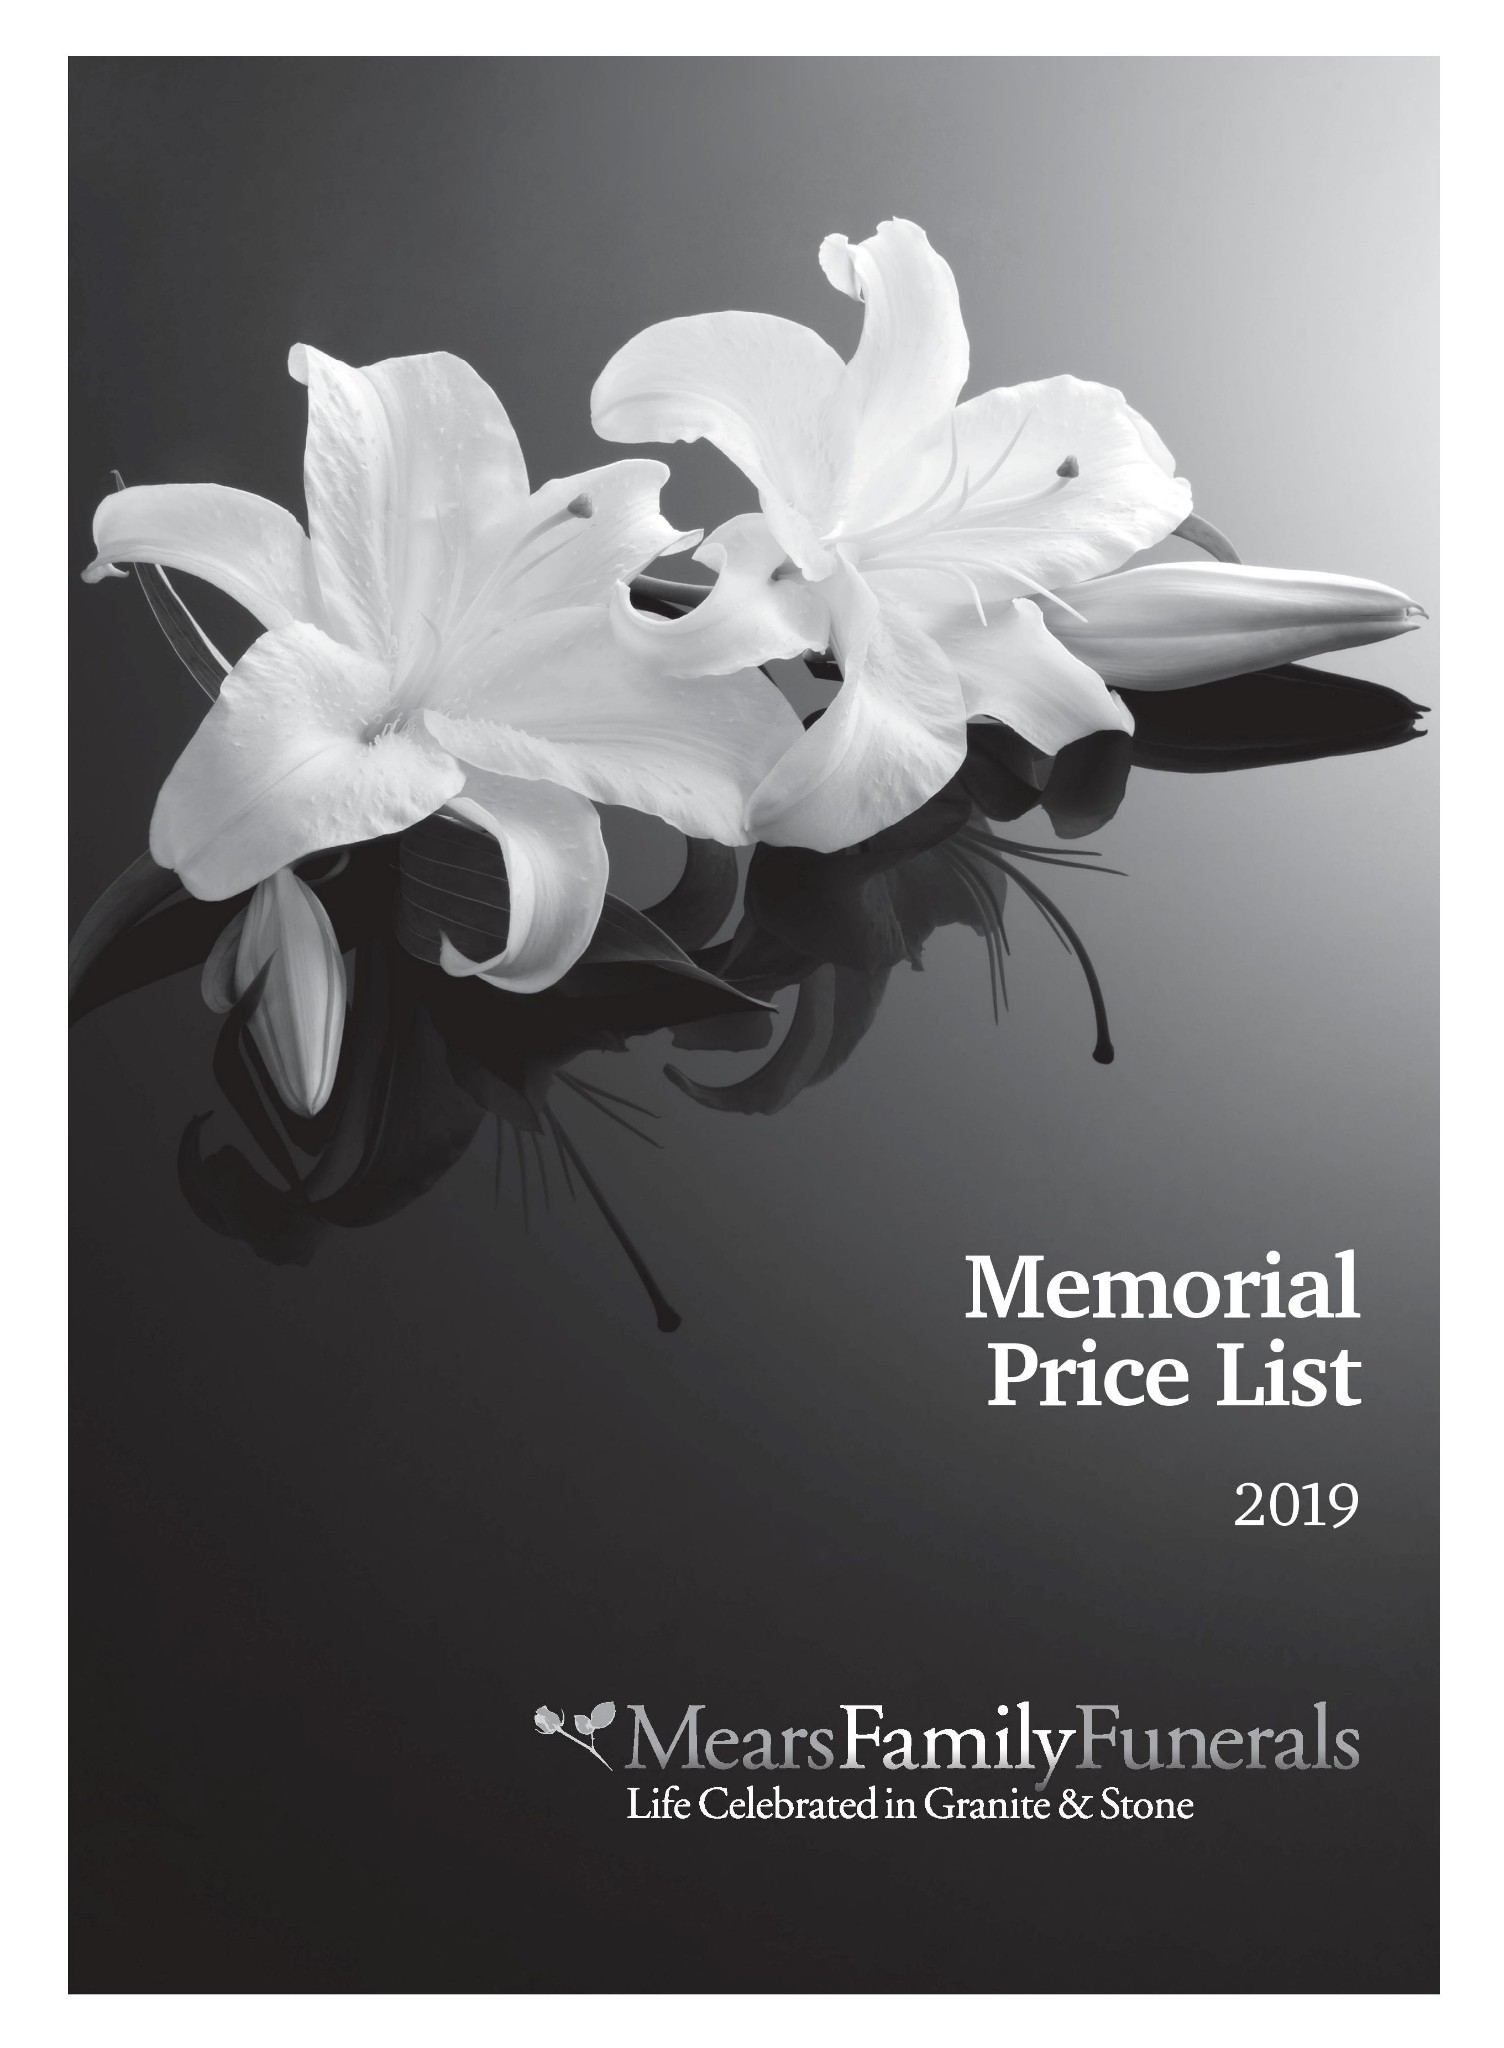 mears-family-funerals-memorials-price-list-2019_web-1-page-001